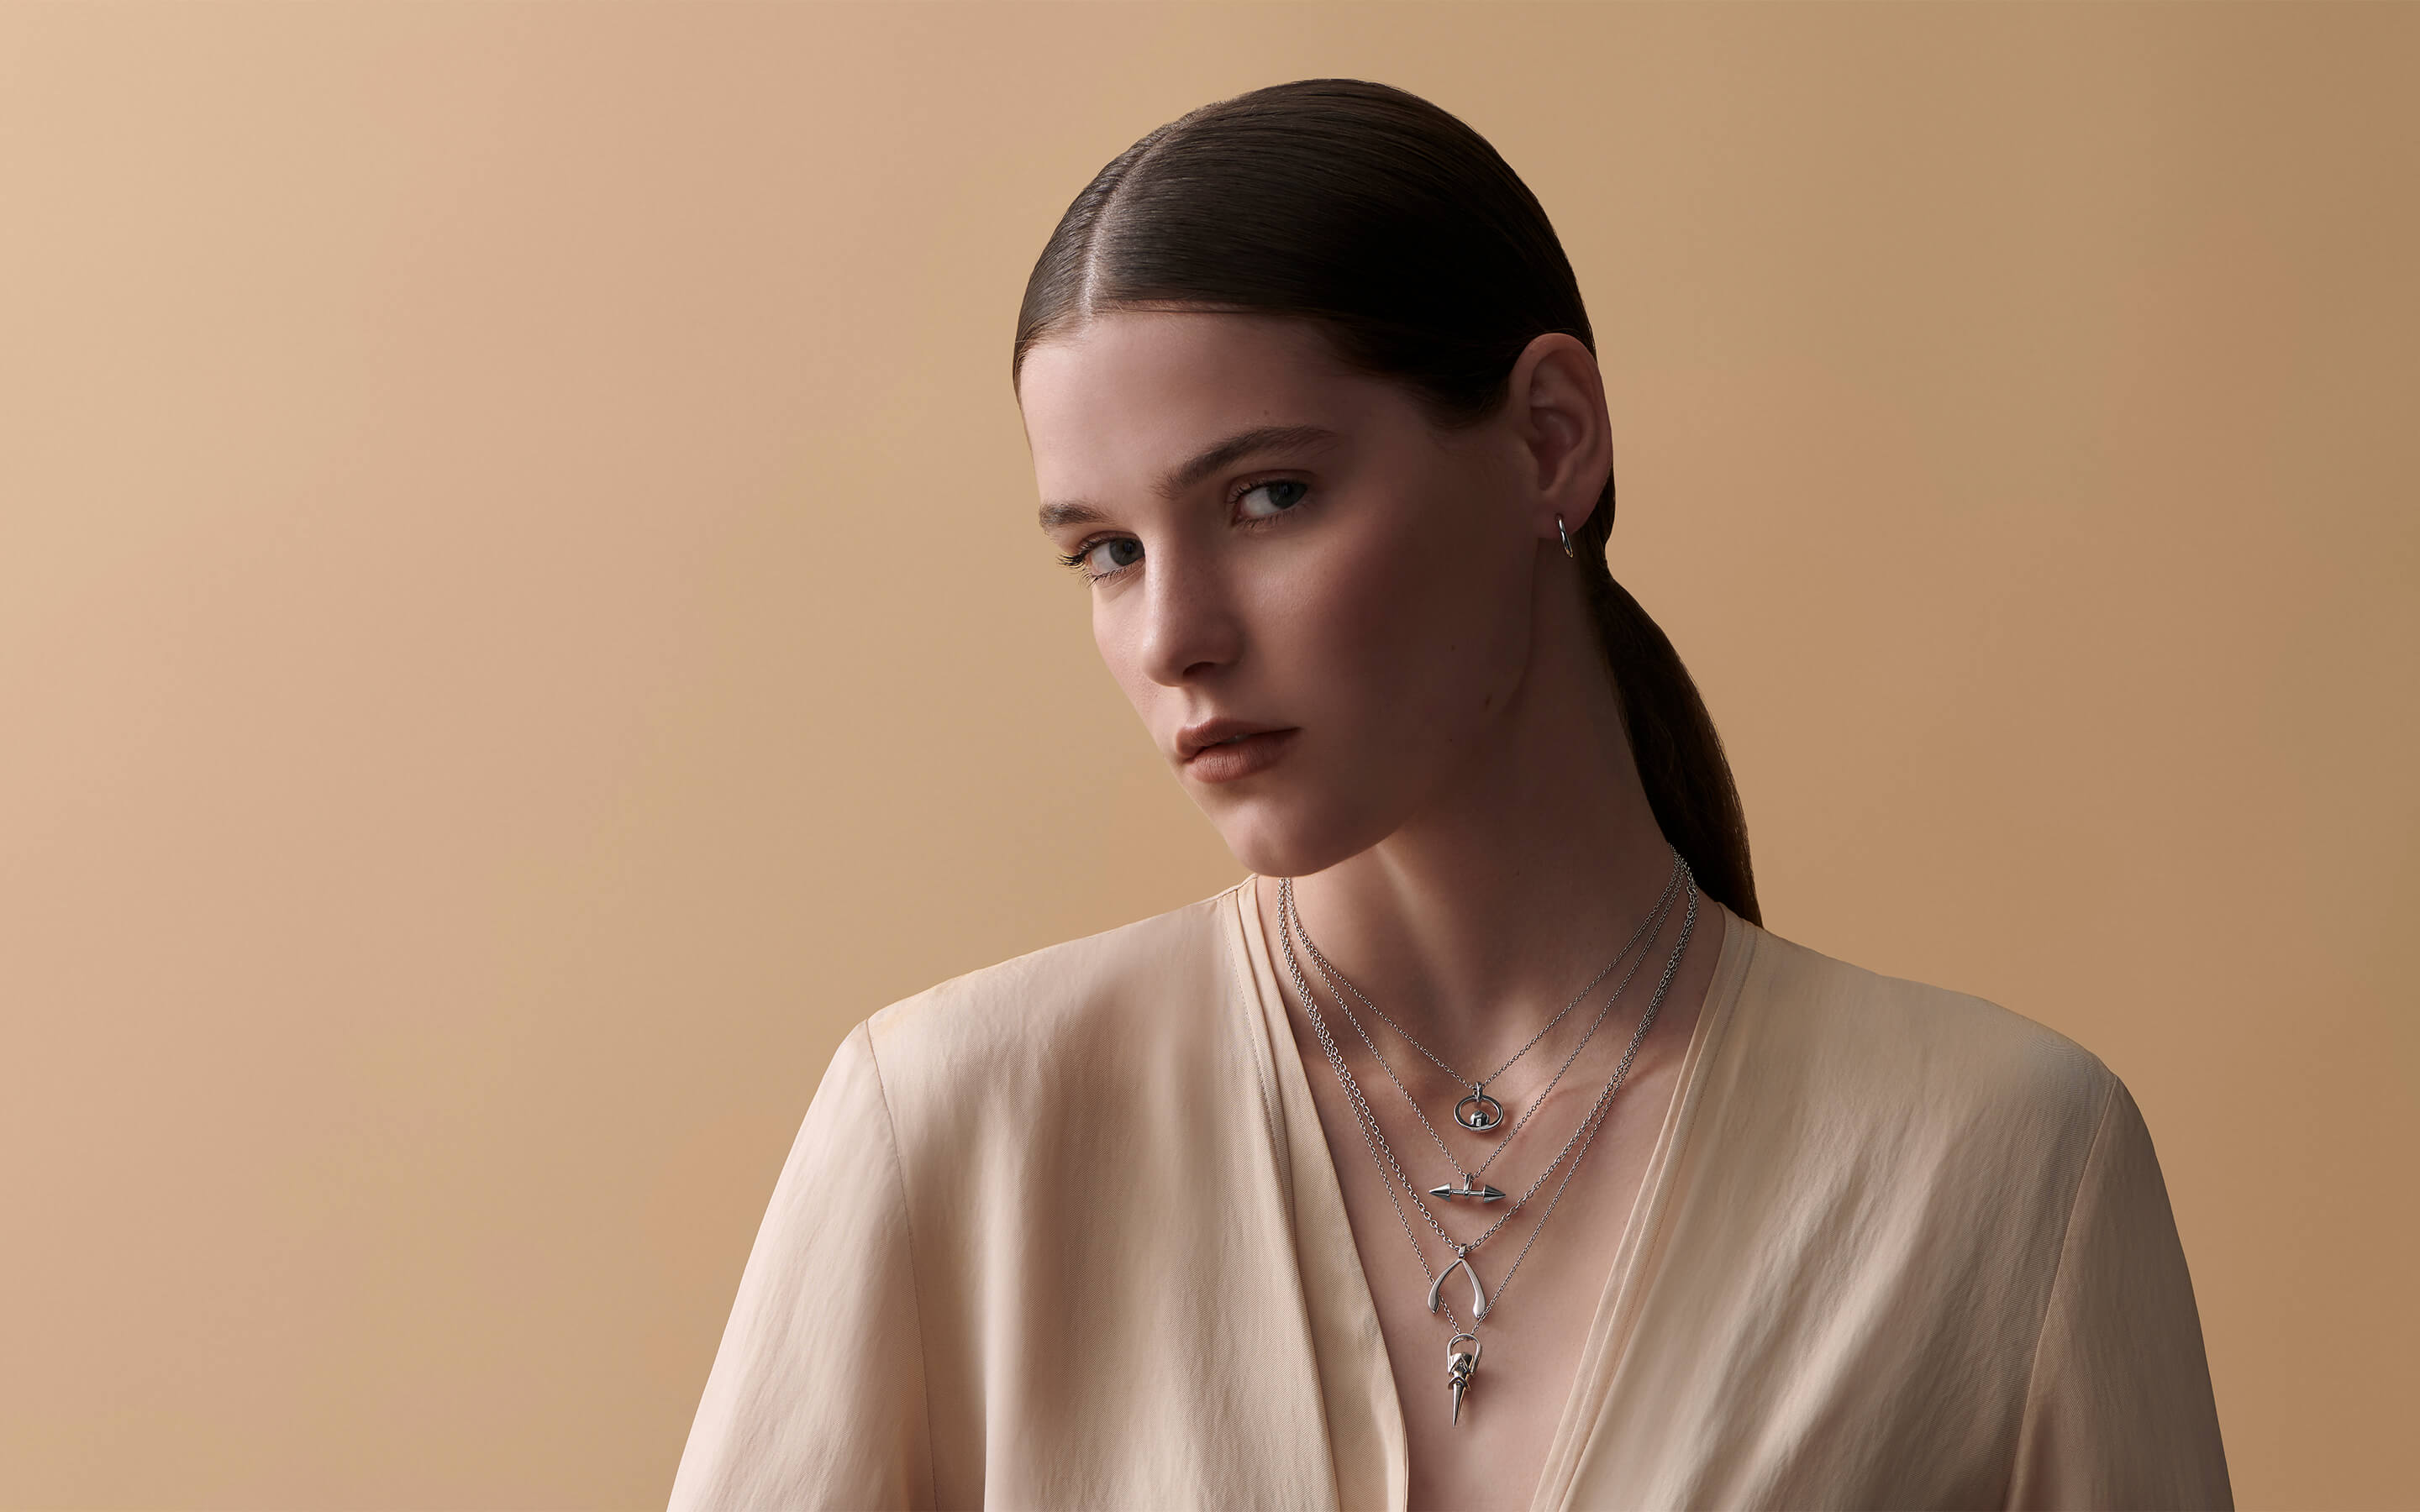 Female model wearing Auvere sterling silver necklaces and earrings